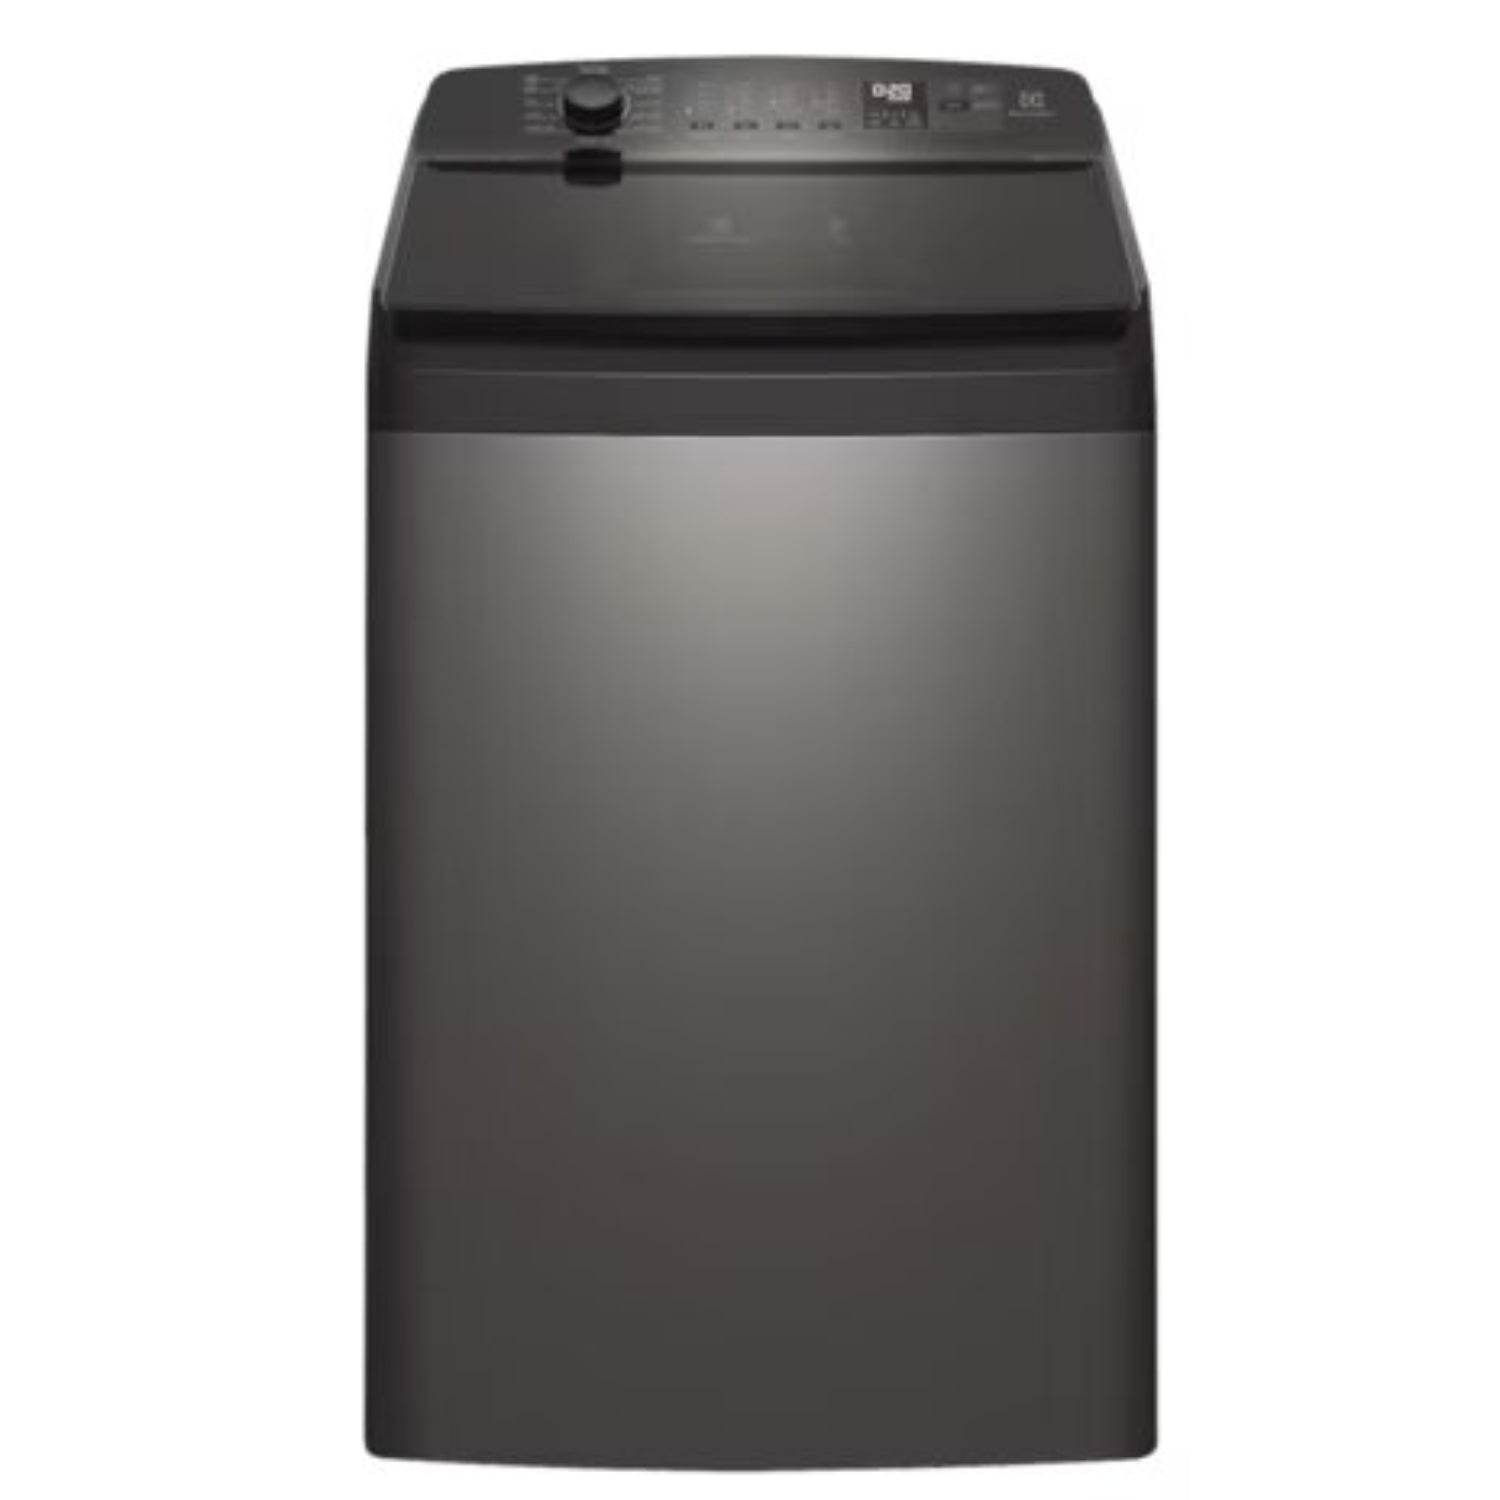 Electrolux 12kg Top Load Washing Machine with Stain Removal and PreMix Technology, Onyx Dark Silver, 10-year Warranty on EcoInverter Motor